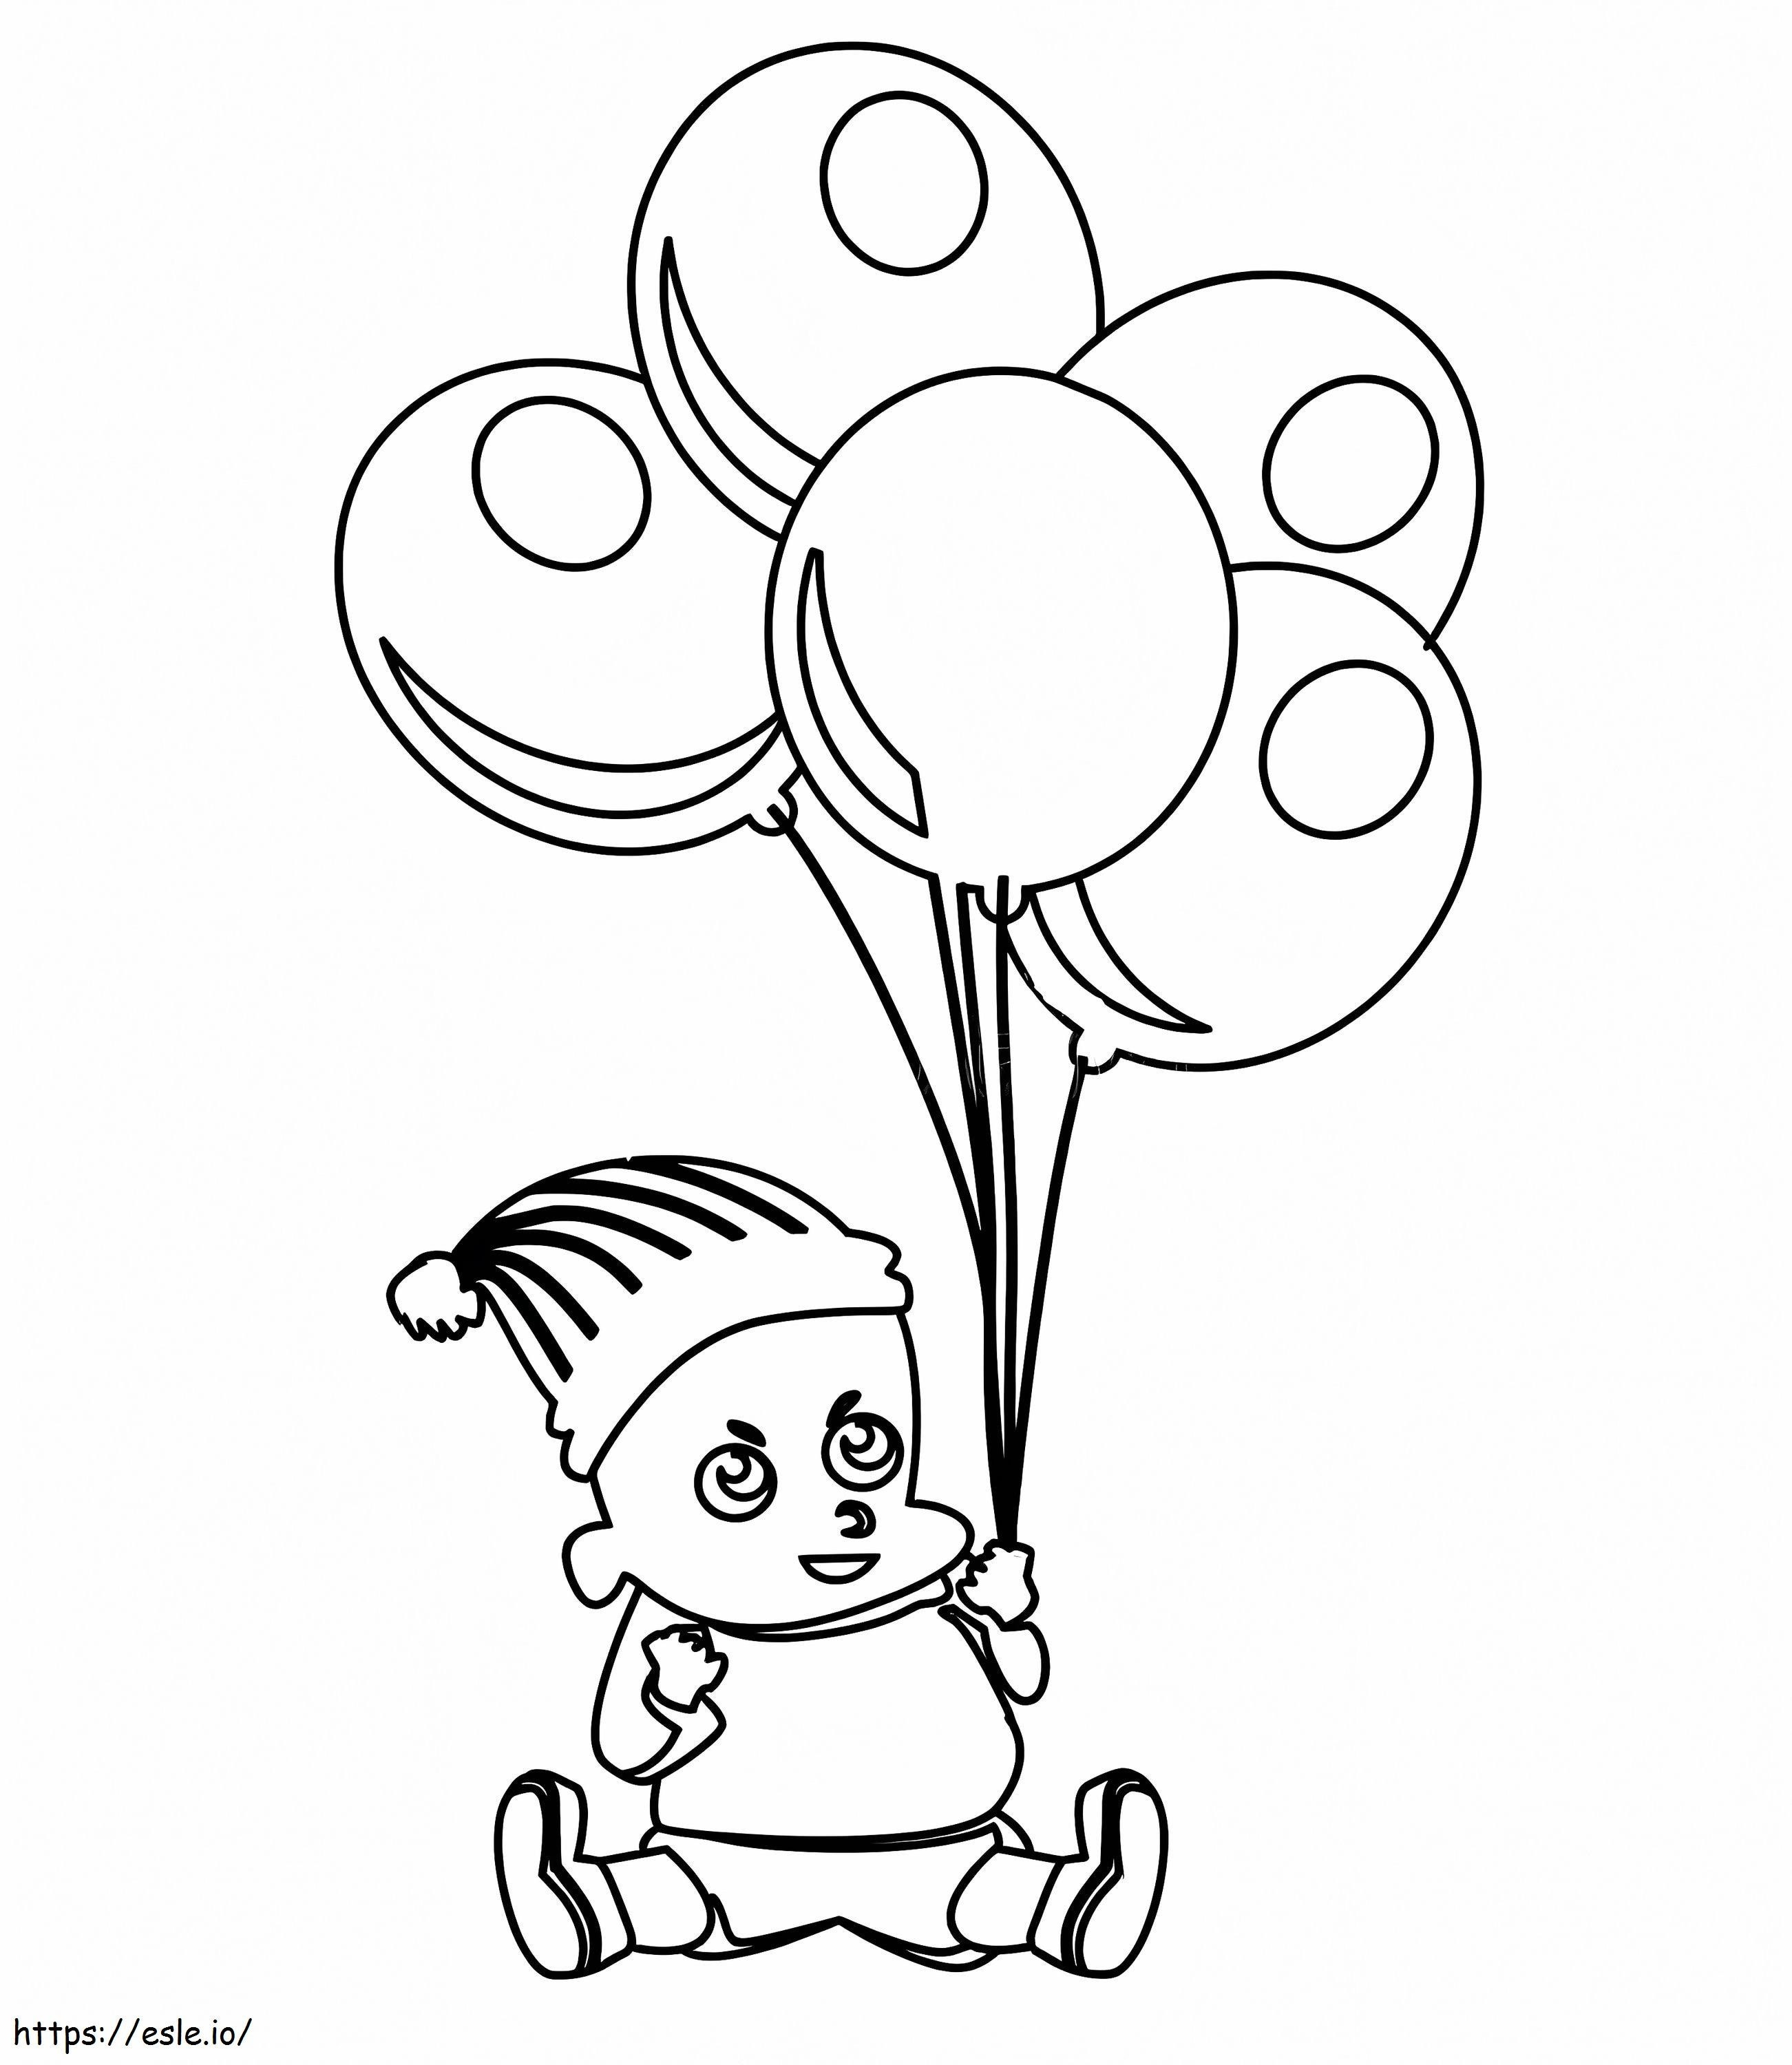 Cute Baby With Balloons coloring page